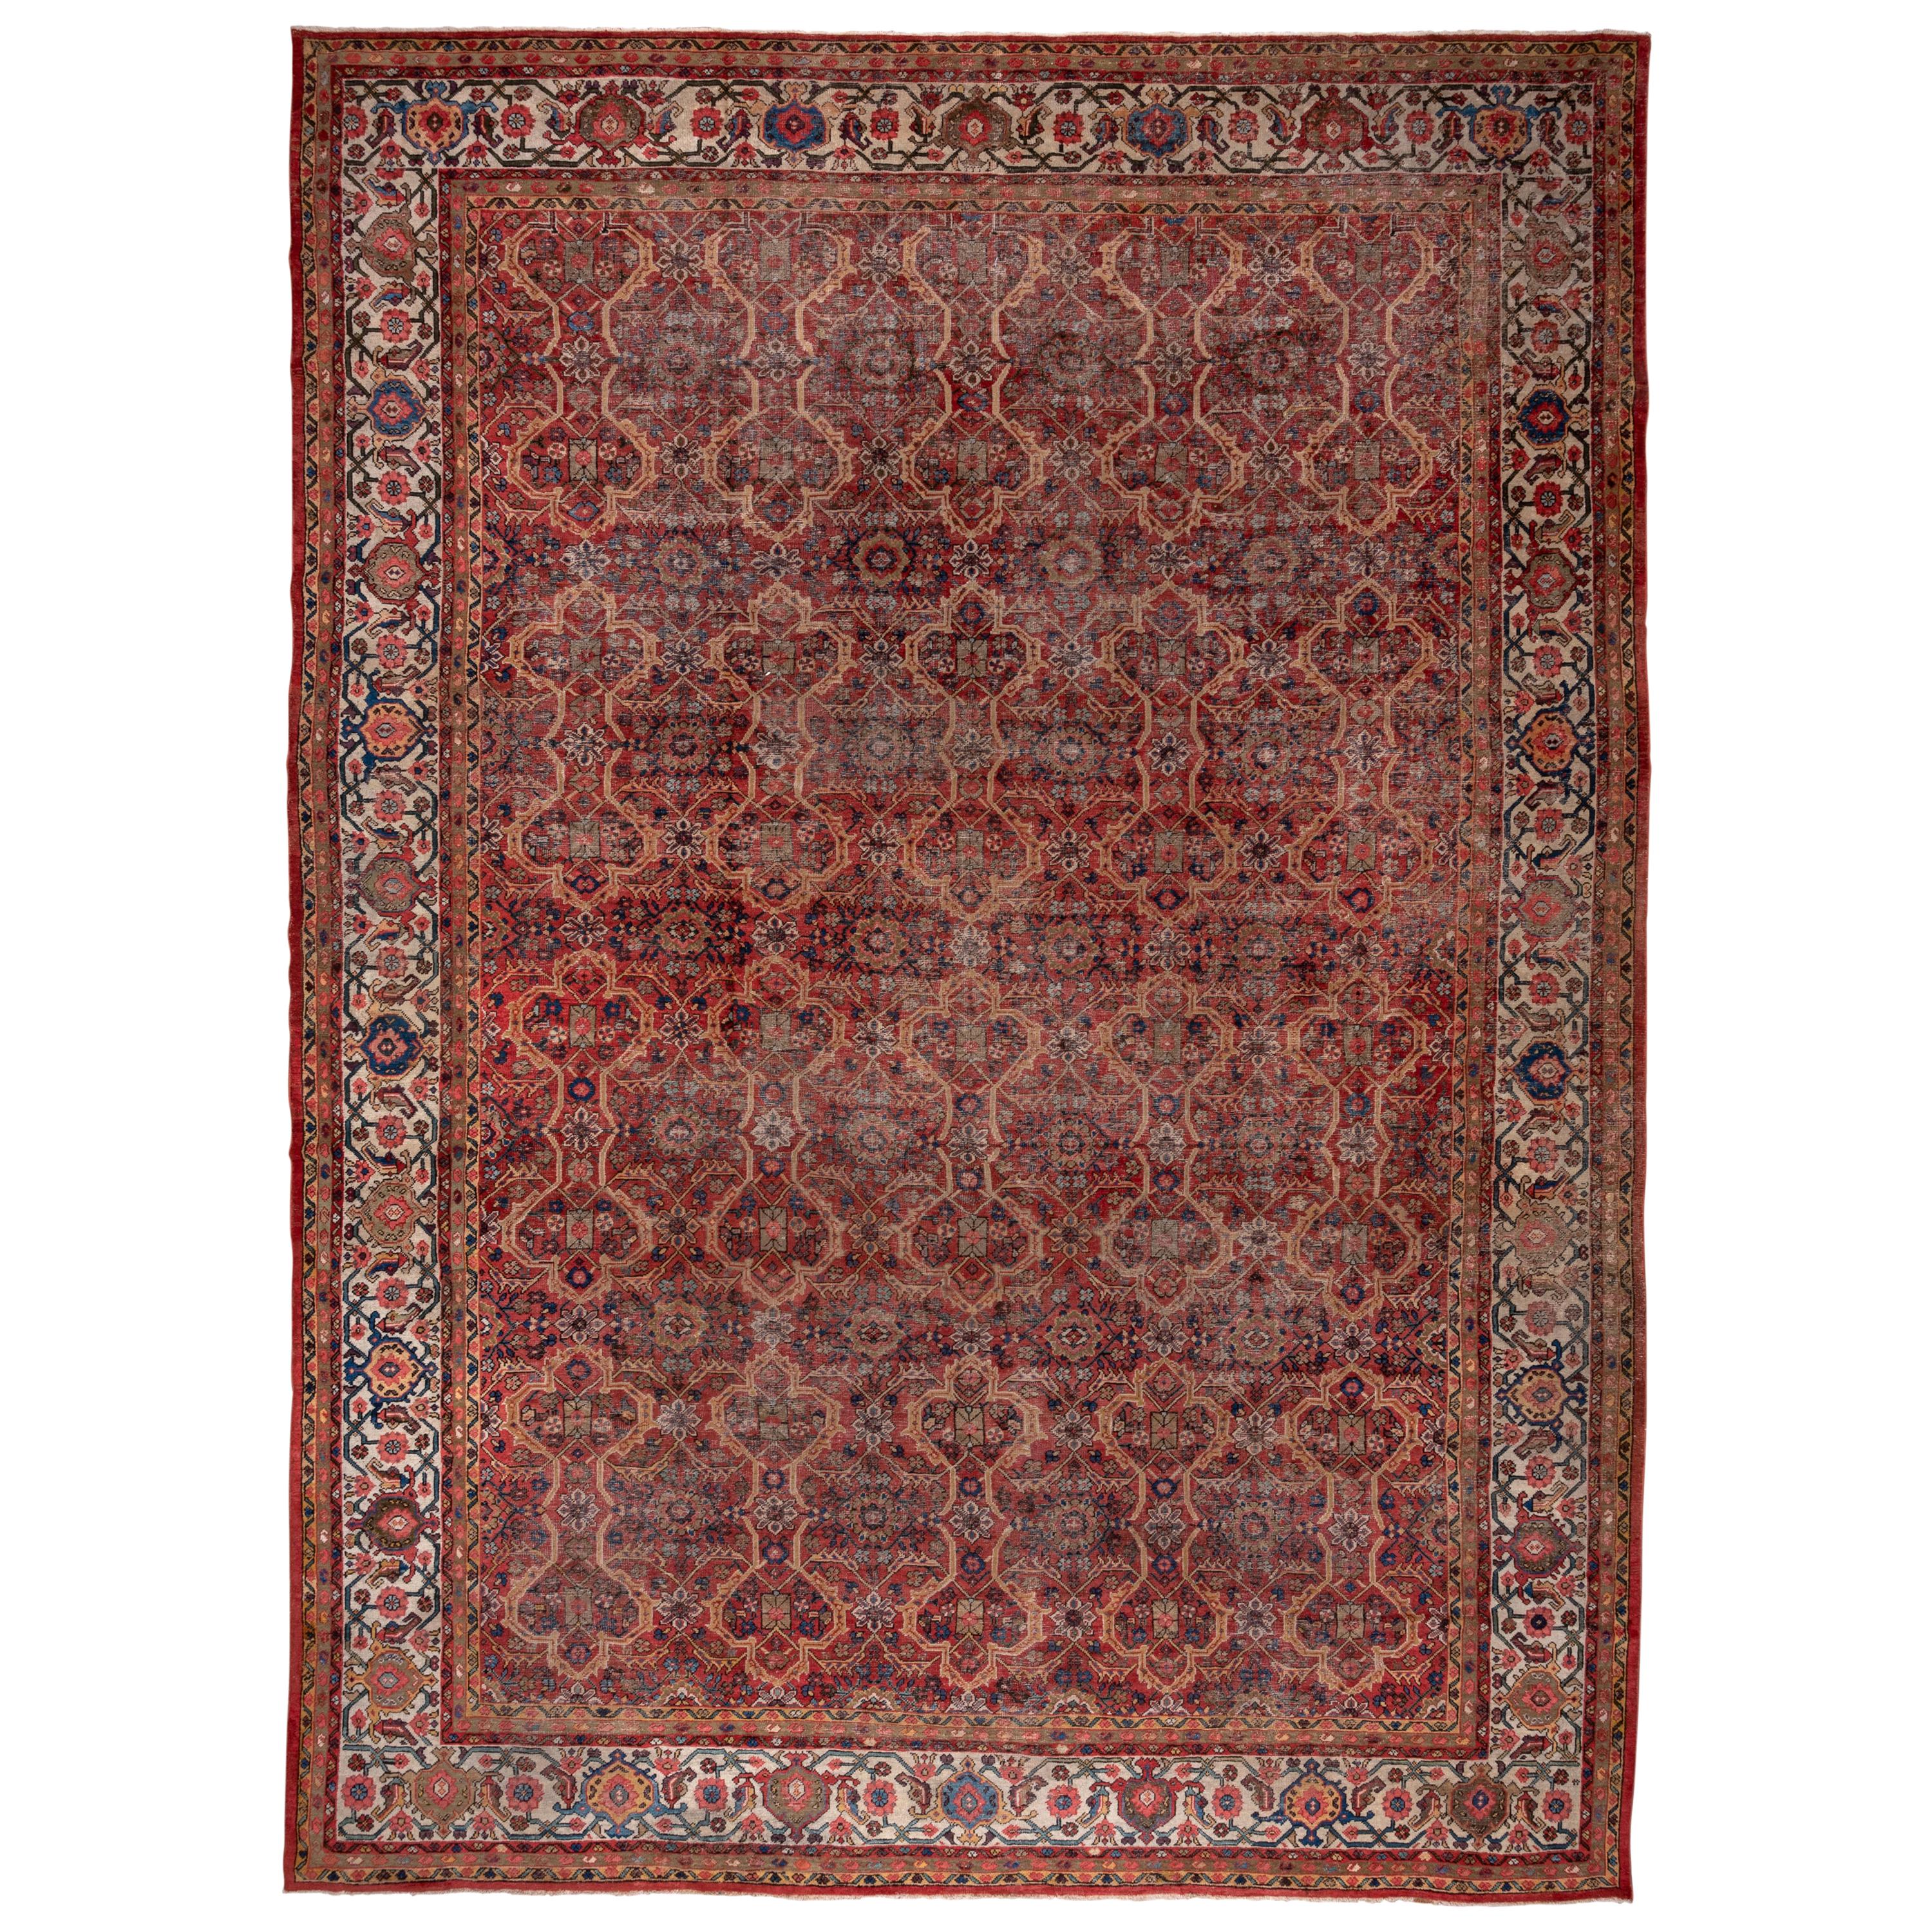 Large Persian Mahal Carpet, Coral Red Field For Sale